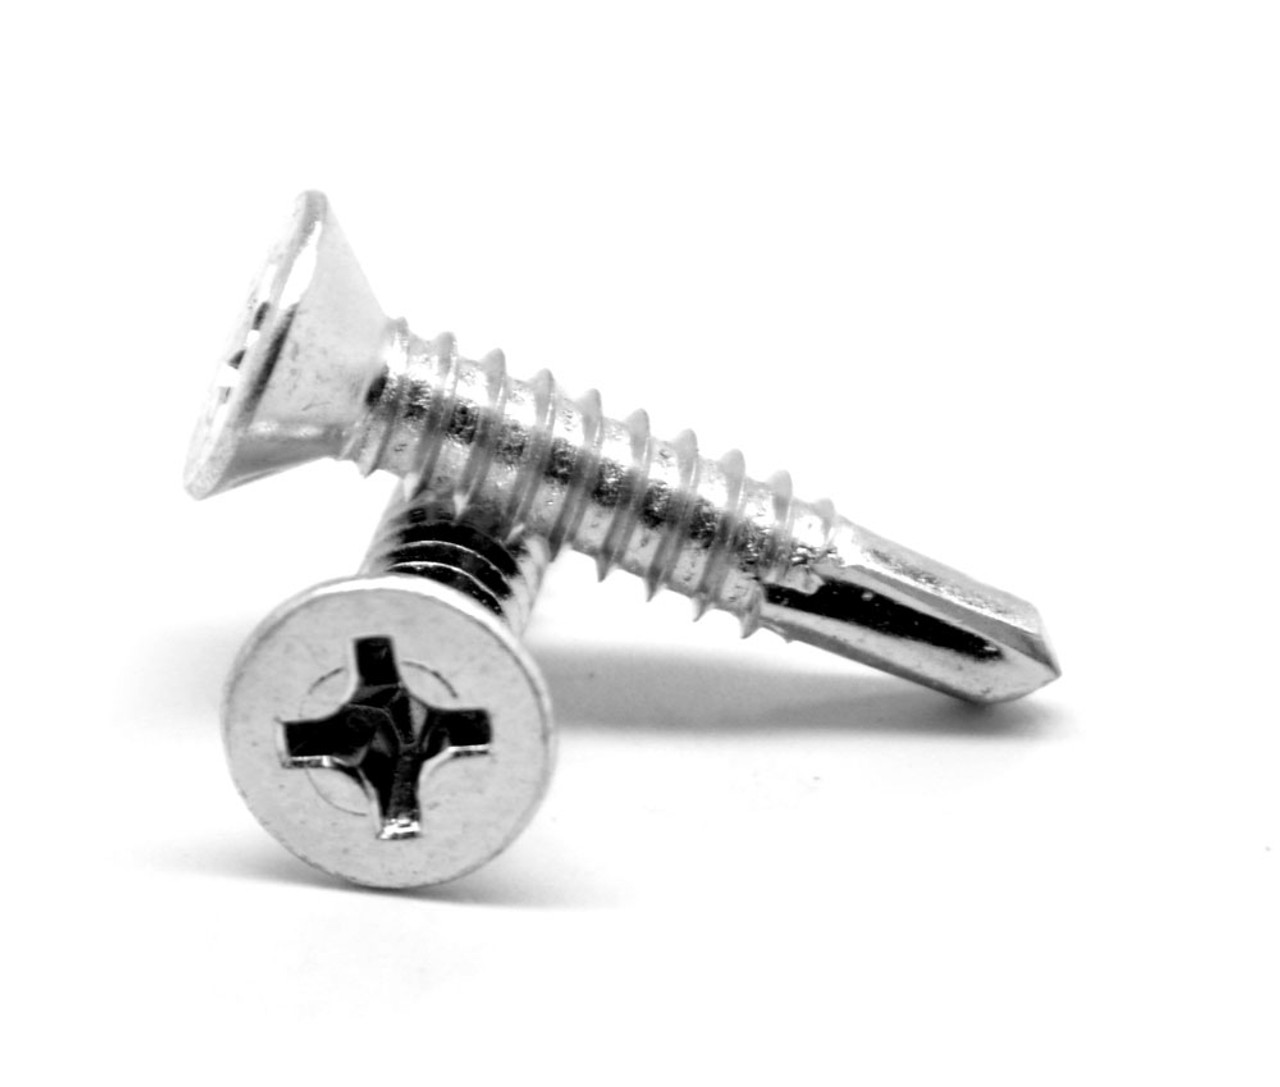 #10-16 x 2 1/2" (FT) Self Drilling Screws Phillips Flat Head #3 Point Stainless Steel 410